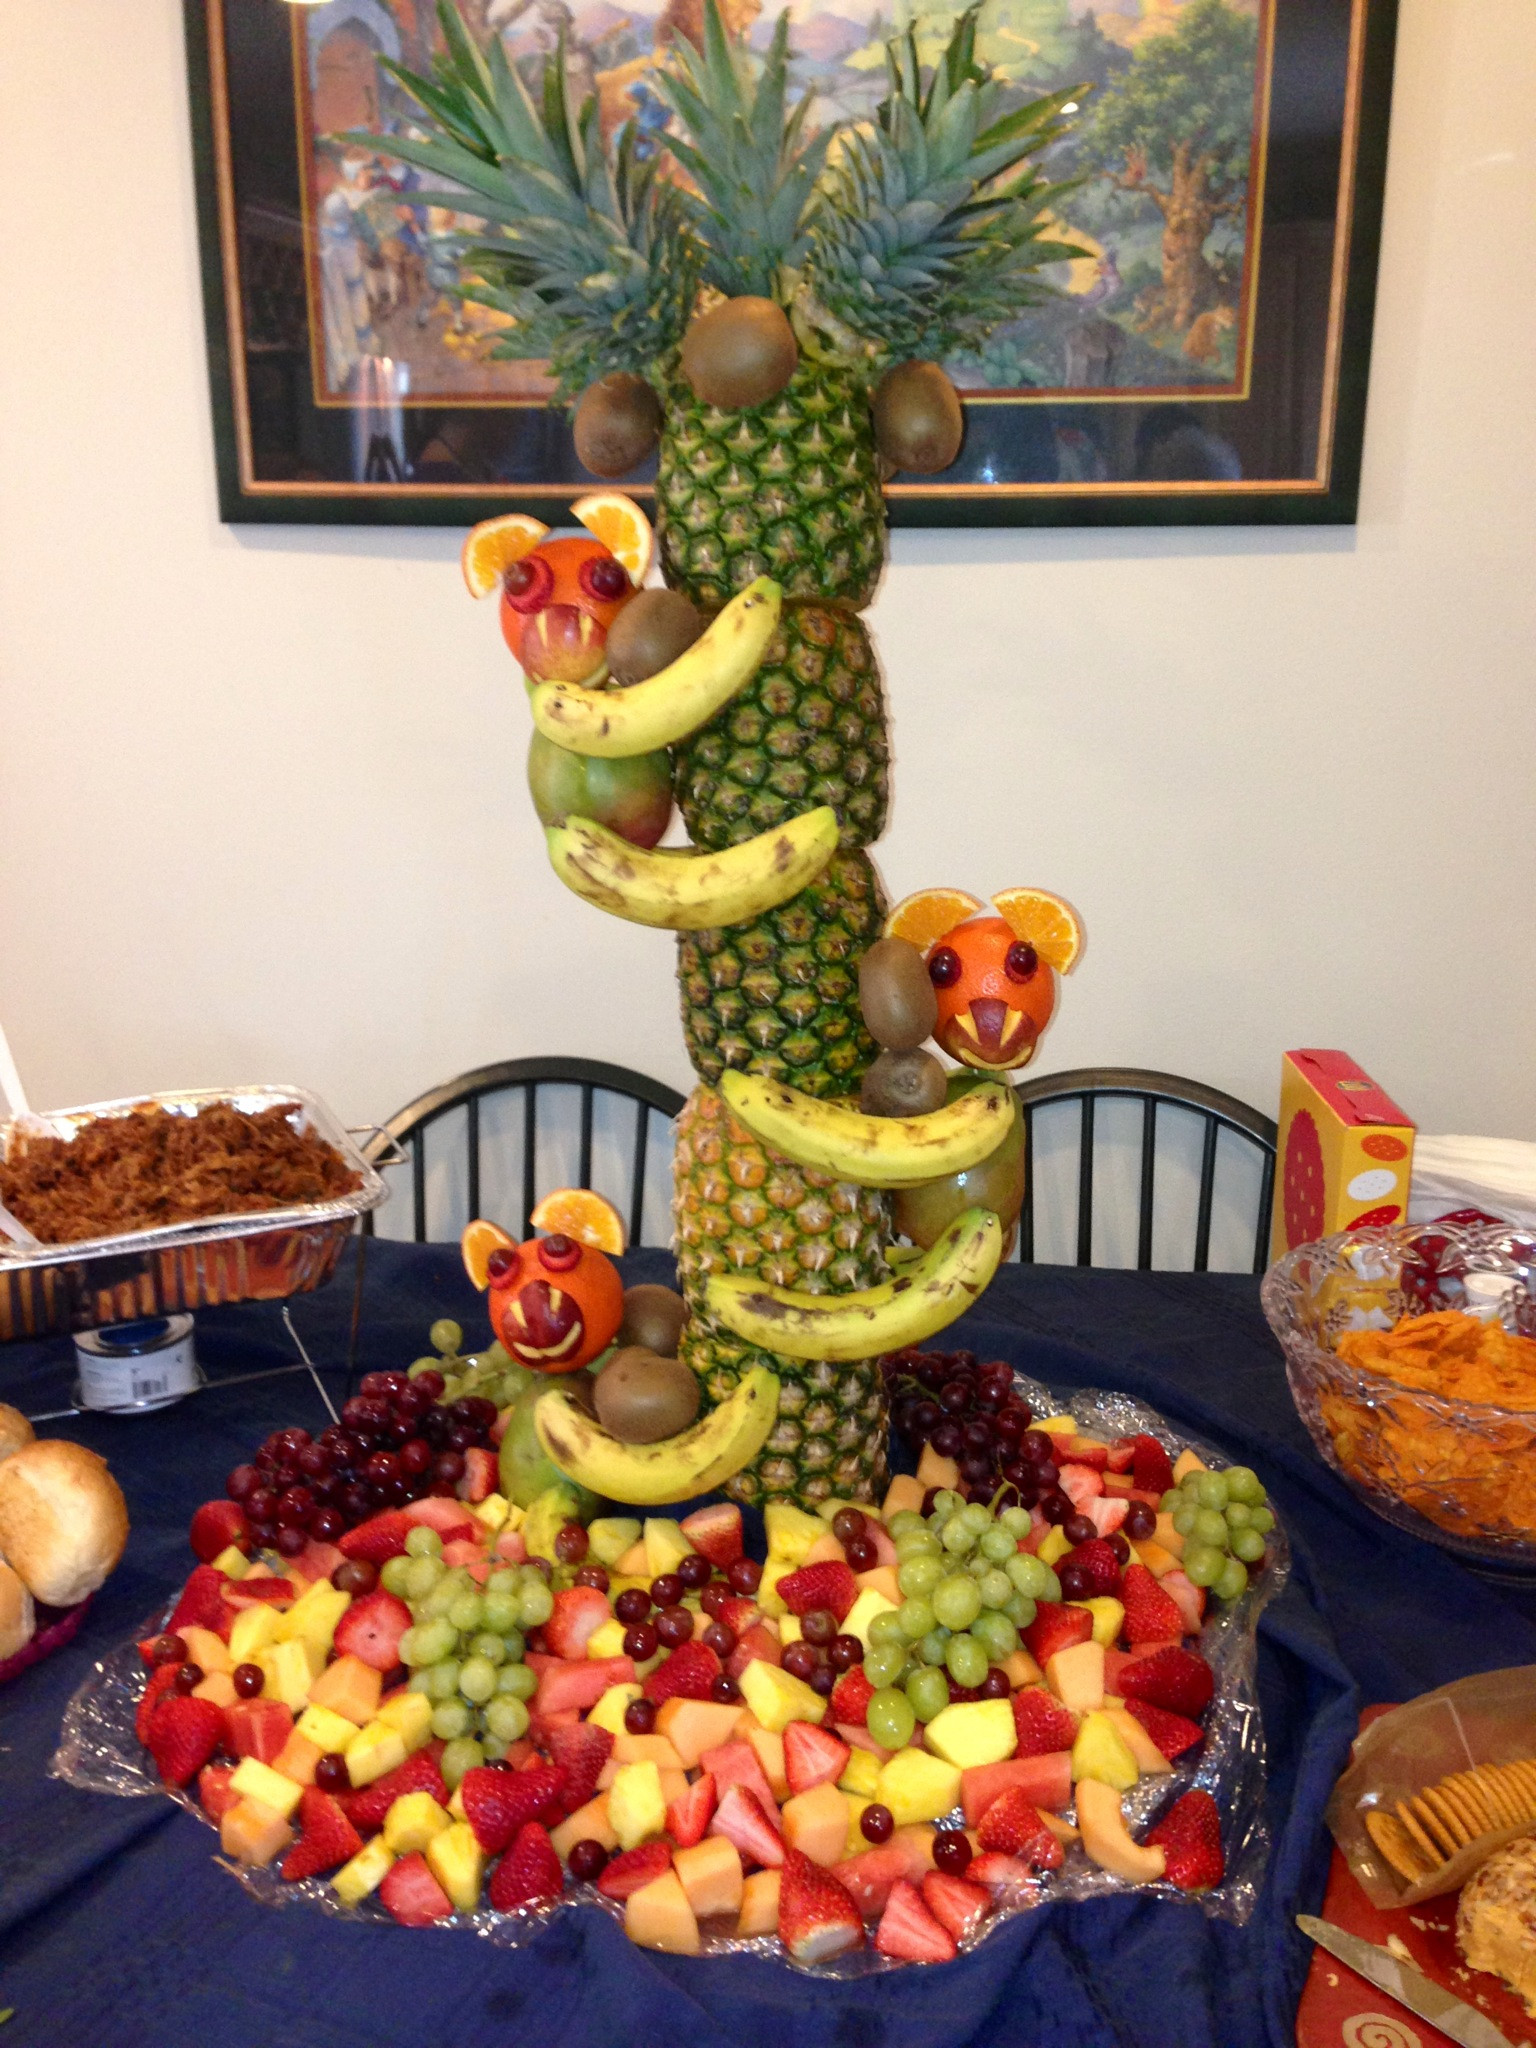 Jungle Party Food Ideas
 Some Ideas For Jungle Theme Baby Shower Food